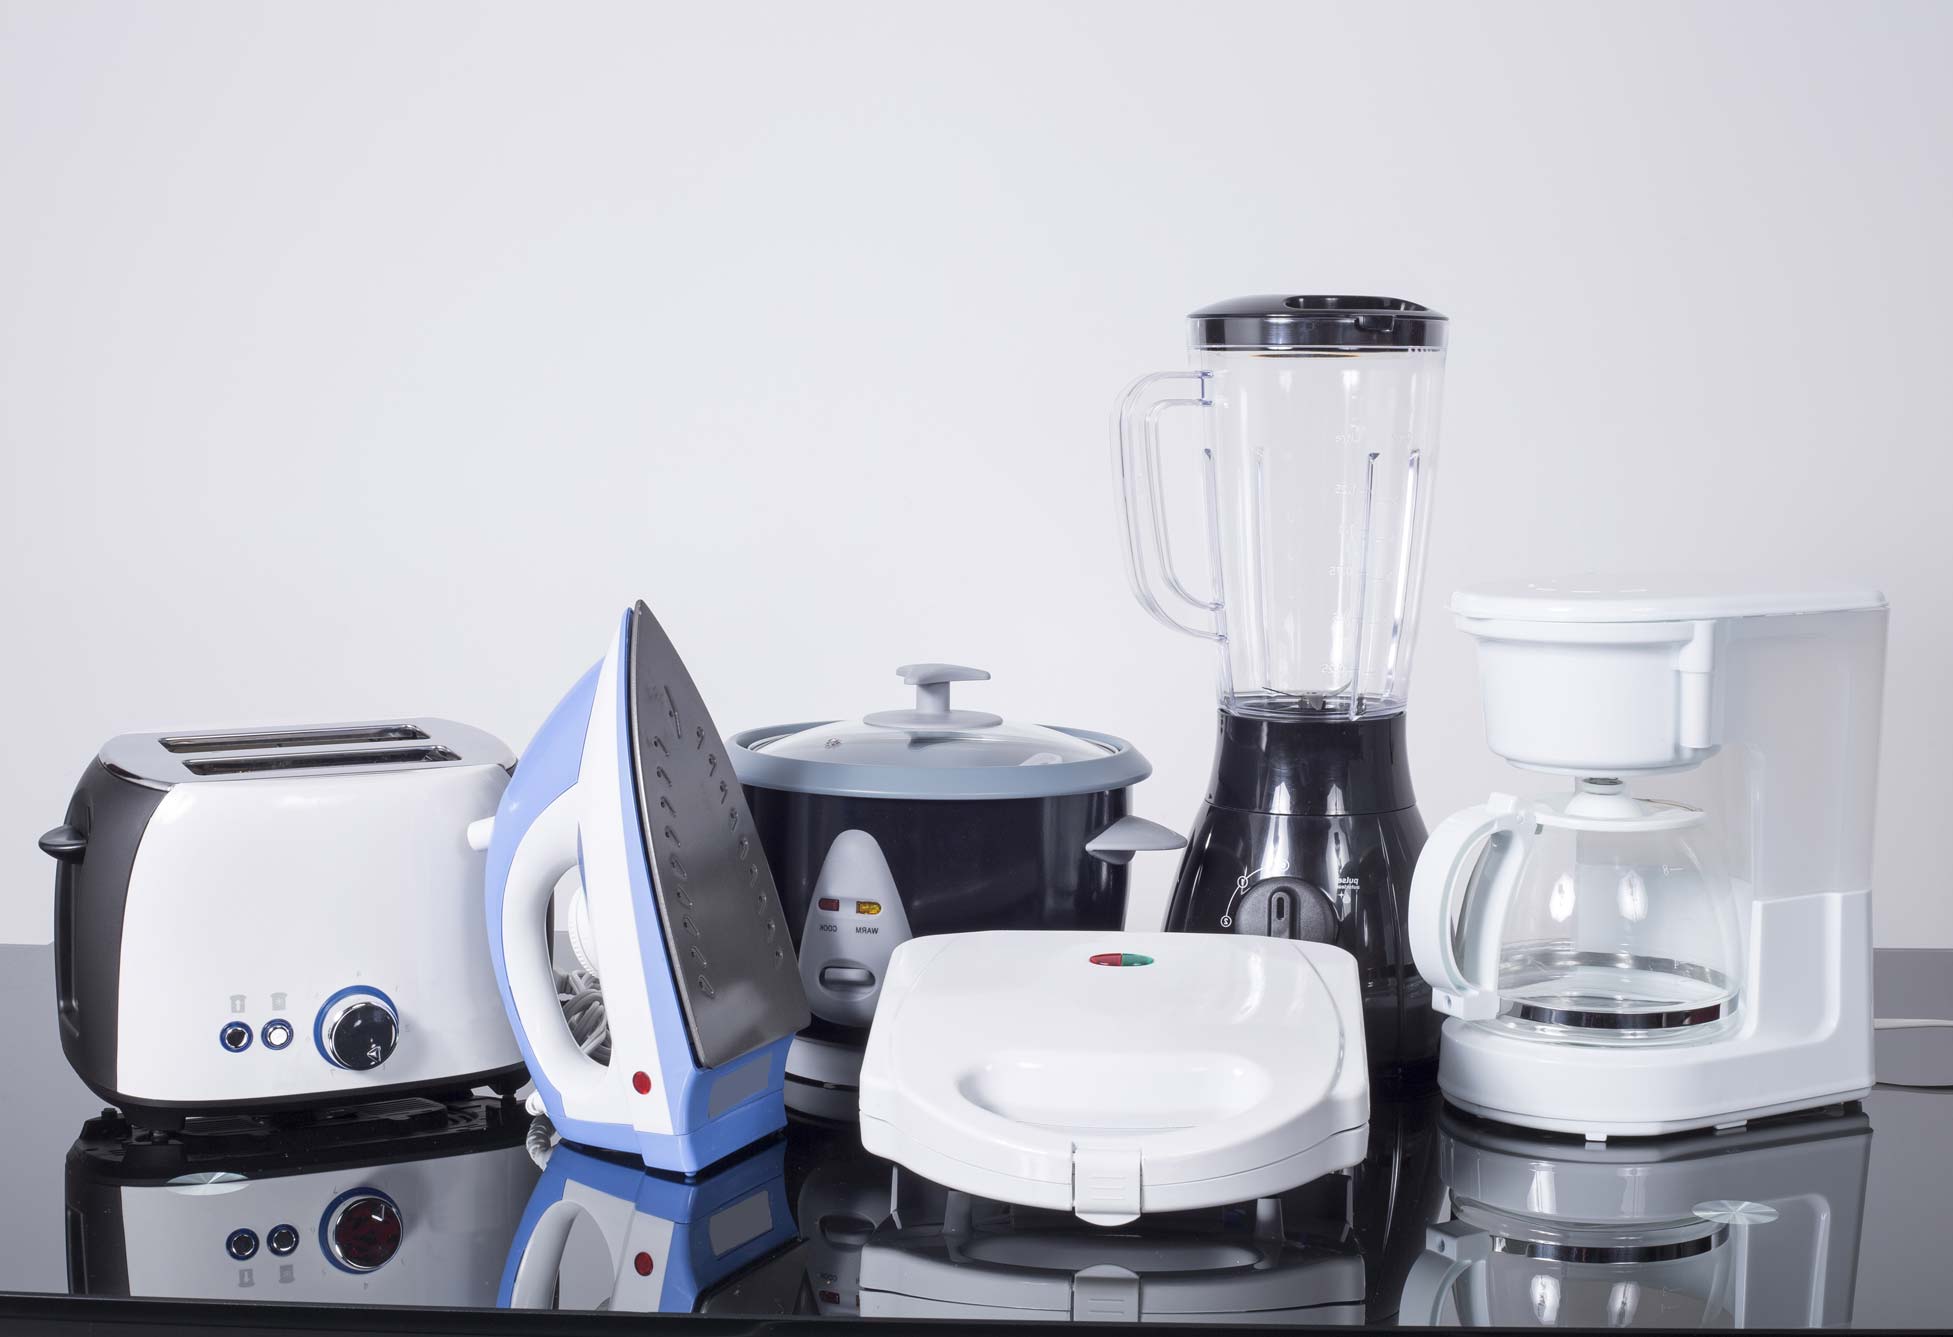 Home Appliances: Are They Covered Under Homeowners Insurance